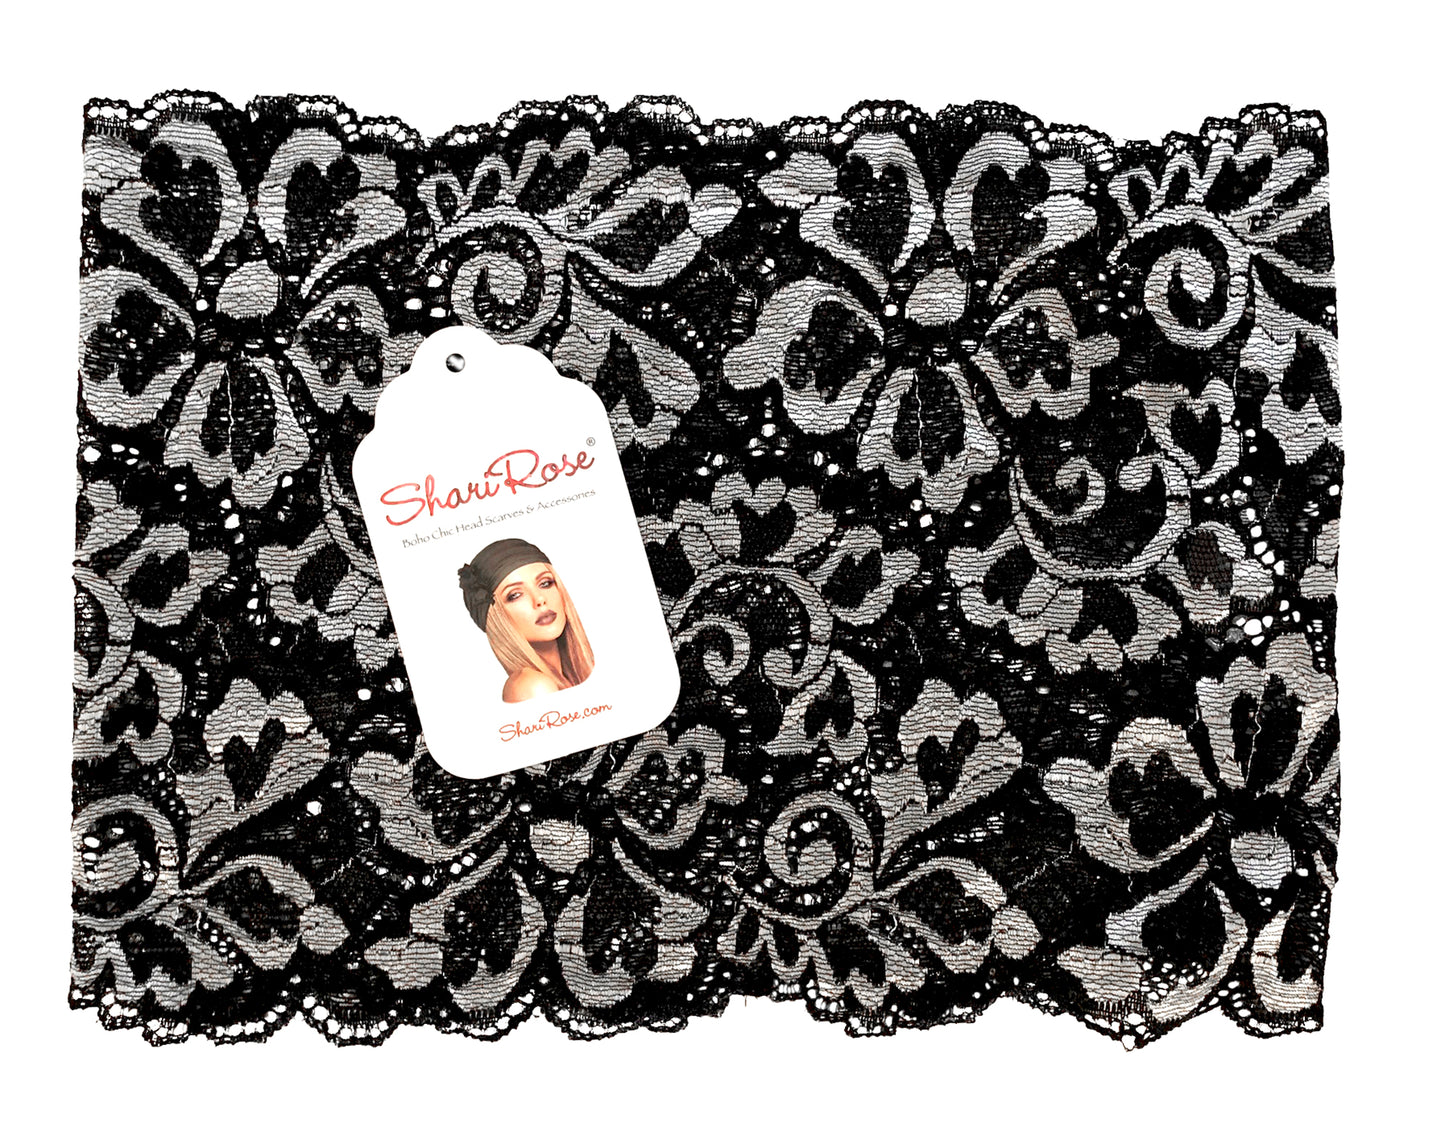 Black silver floral shabby chic lace headband